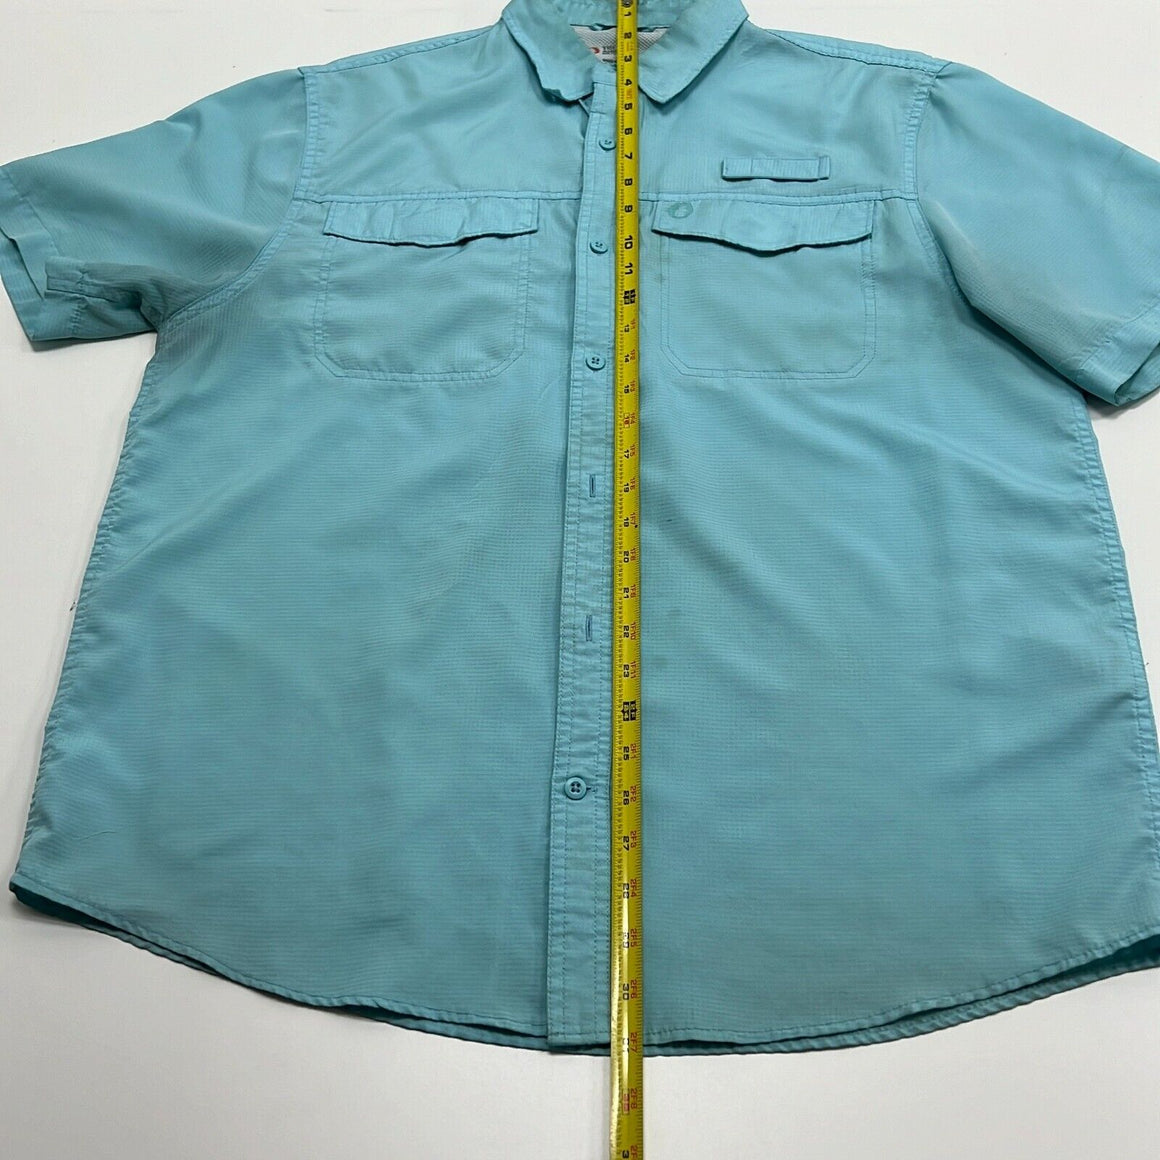 The American Outdoorsman Men's Blue Chest Pocket Fishing Button-Up